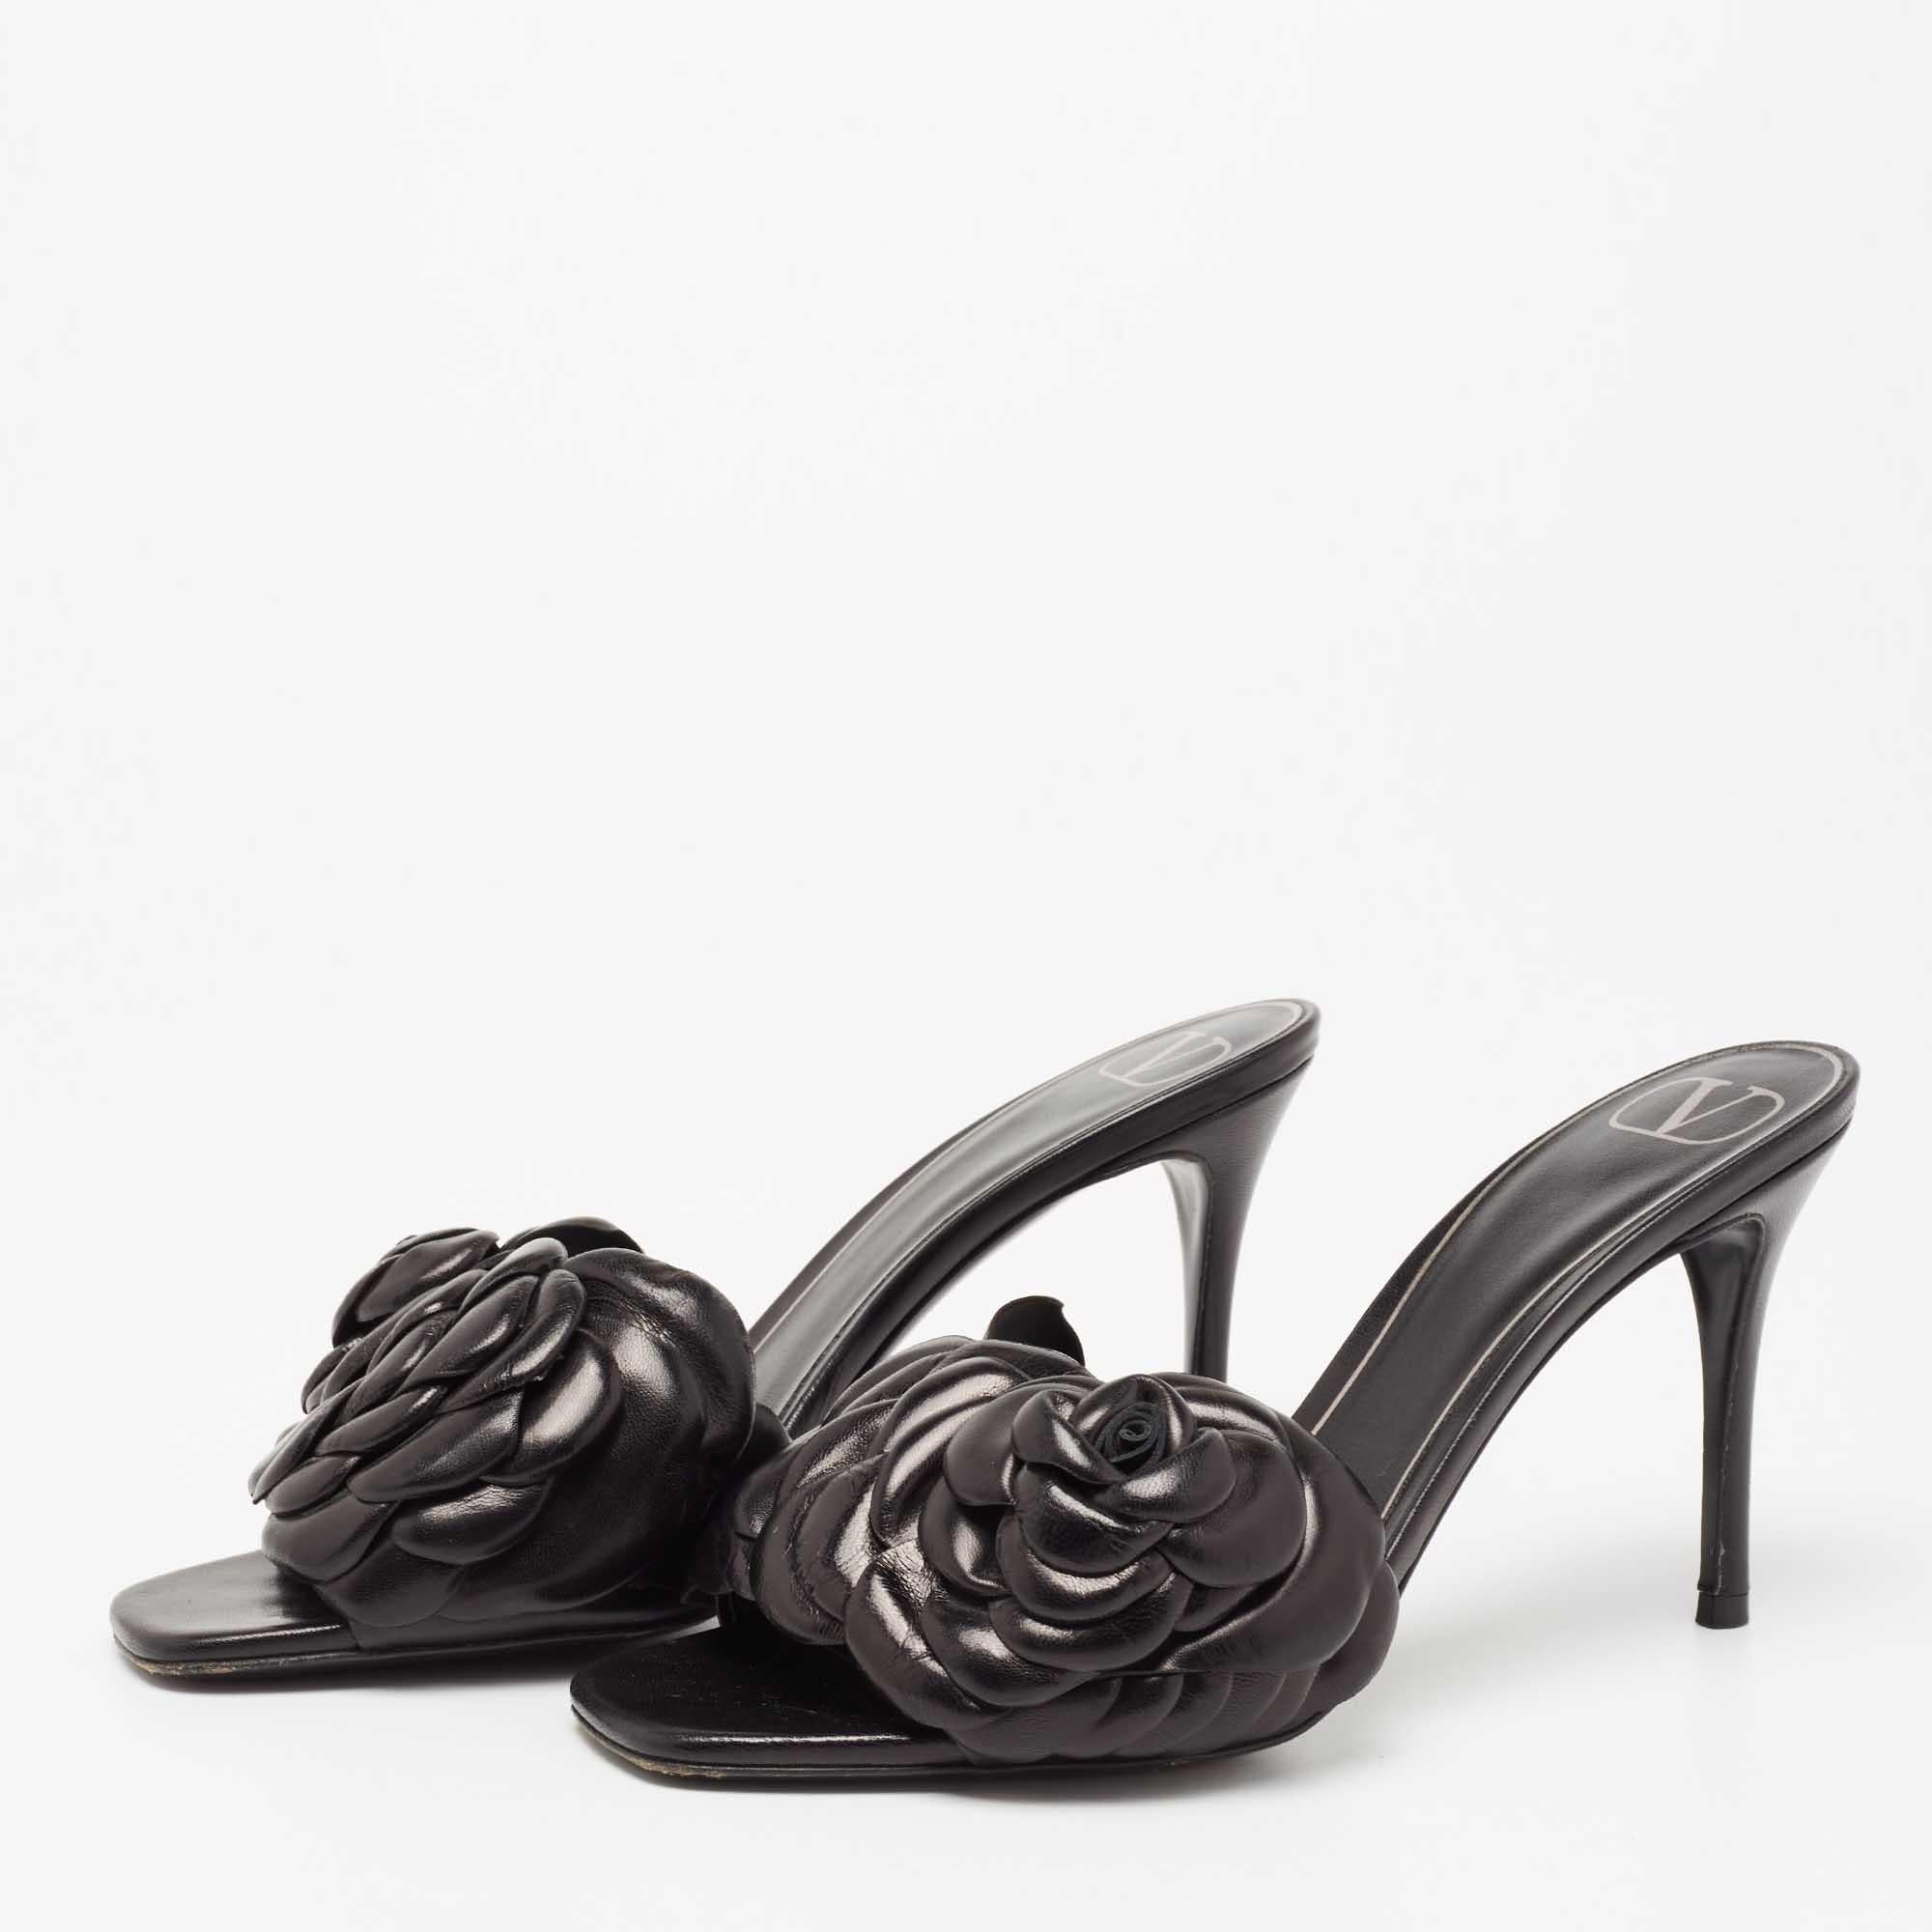 These Valentino black sandals come bearing the rose—a symbol of timeless beauty present in many of the brand's designs. These slides, constructed using leather, feature a 3D rose detail on the uppers with varying sizes of leather petals. The sandals